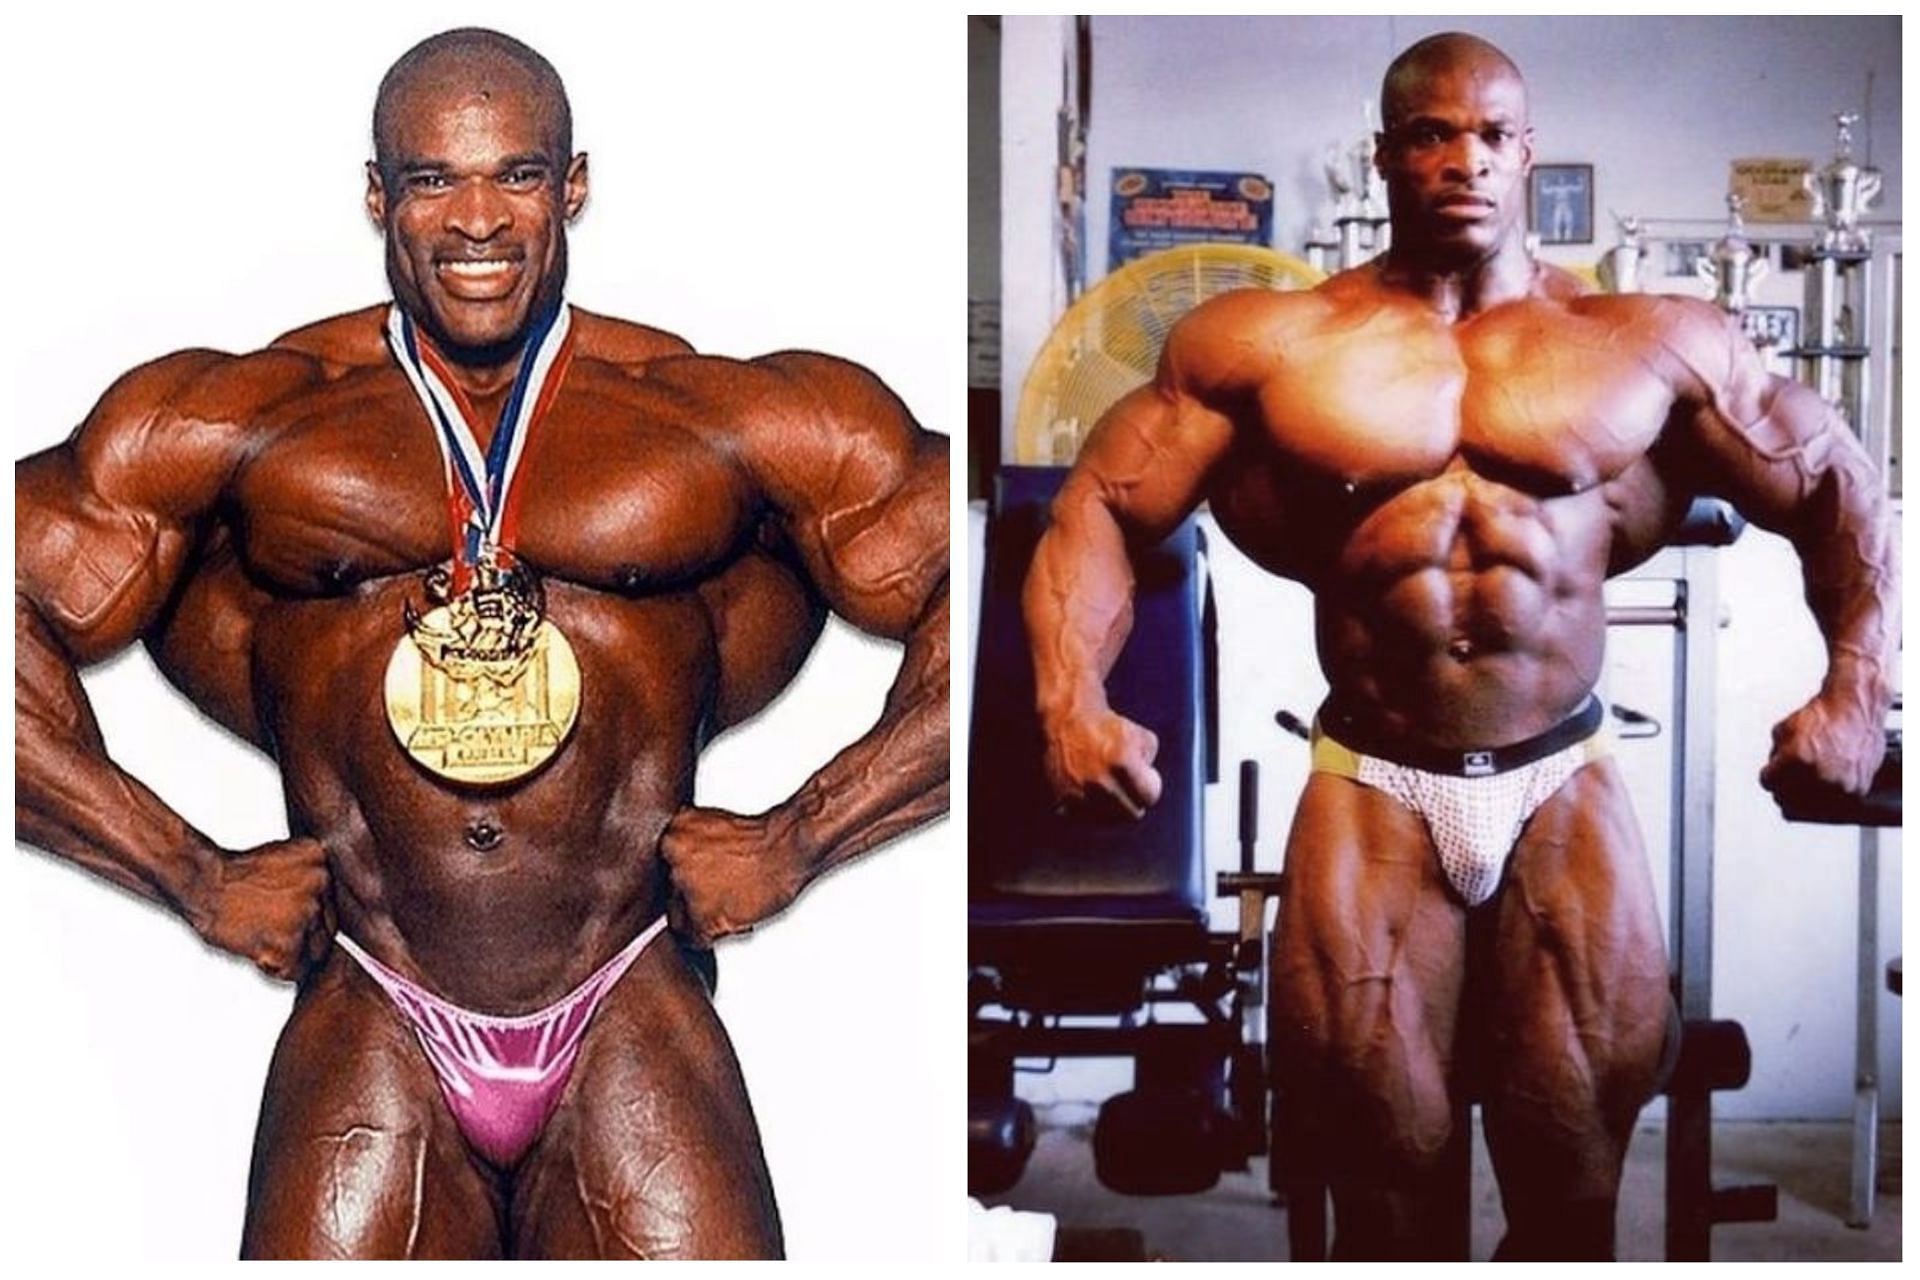 1998 V.S 1999 *RONNIE COLEMAN* In The Ultimate Mr. Olympia Dream Match!! -  YouTube